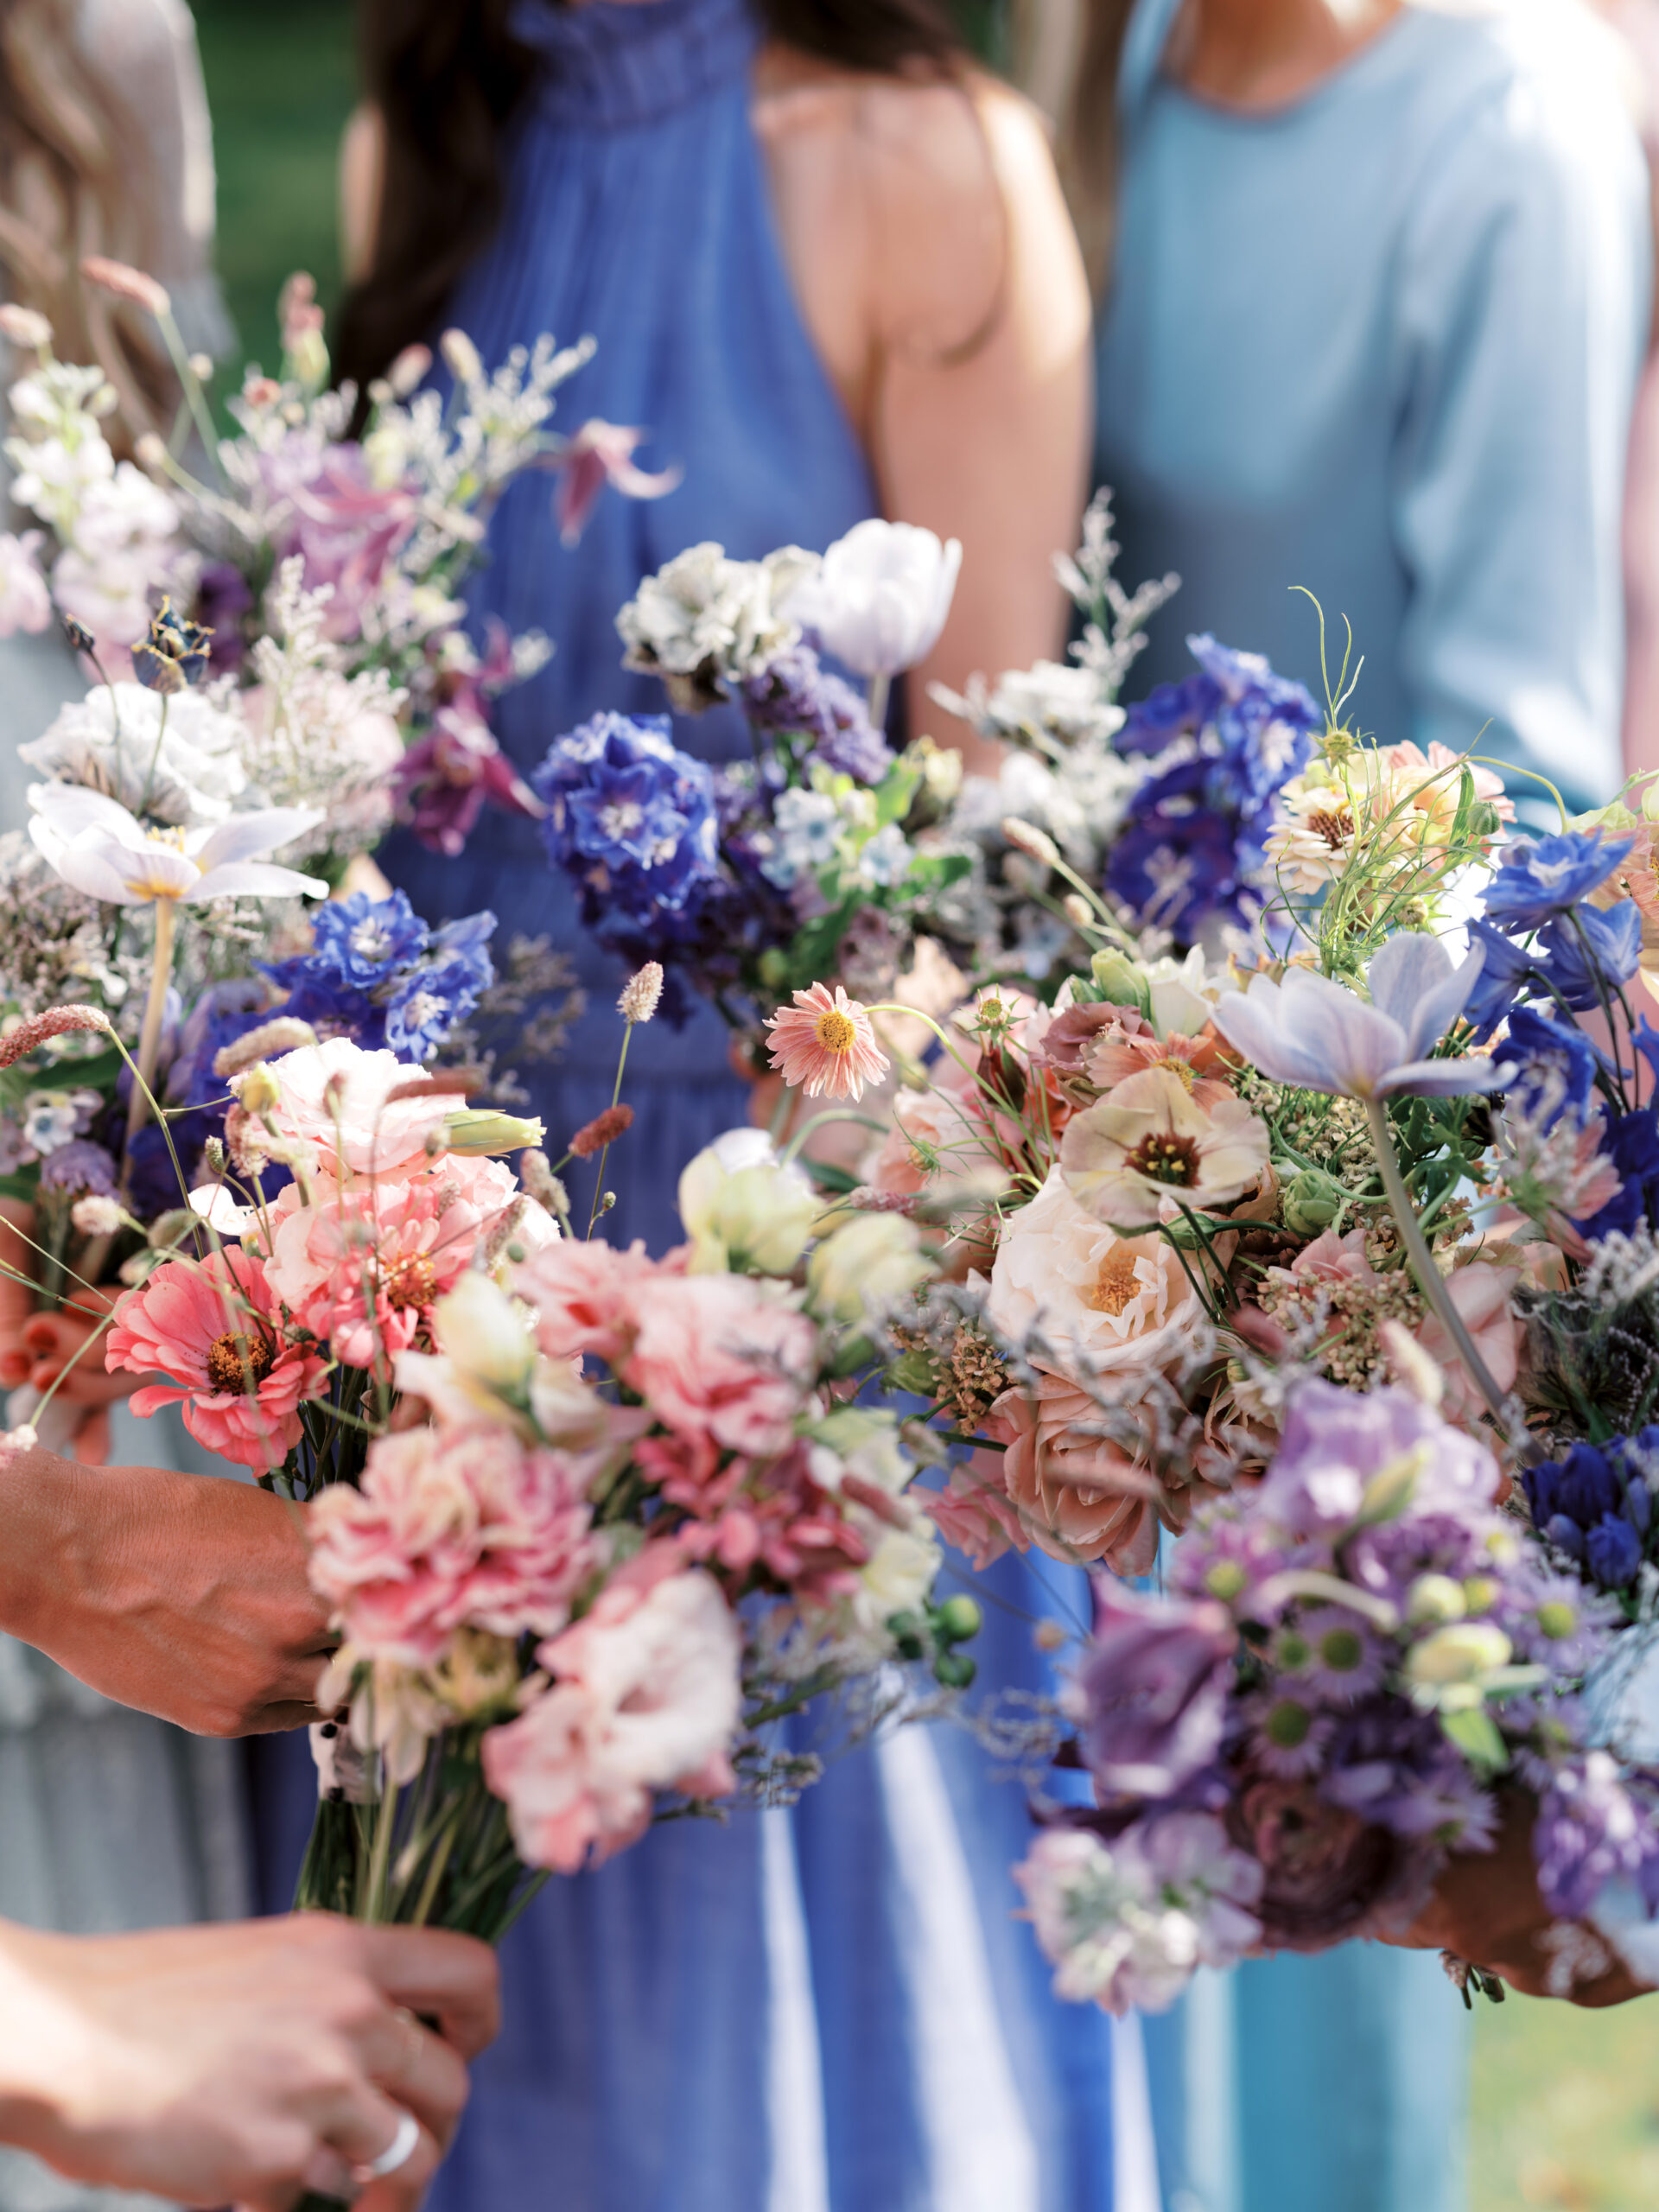 The bridesmaids' pretty flowers in shades of blue, pink and purple. Upstate New York luxury wedding image by Jenny Fu Studio.